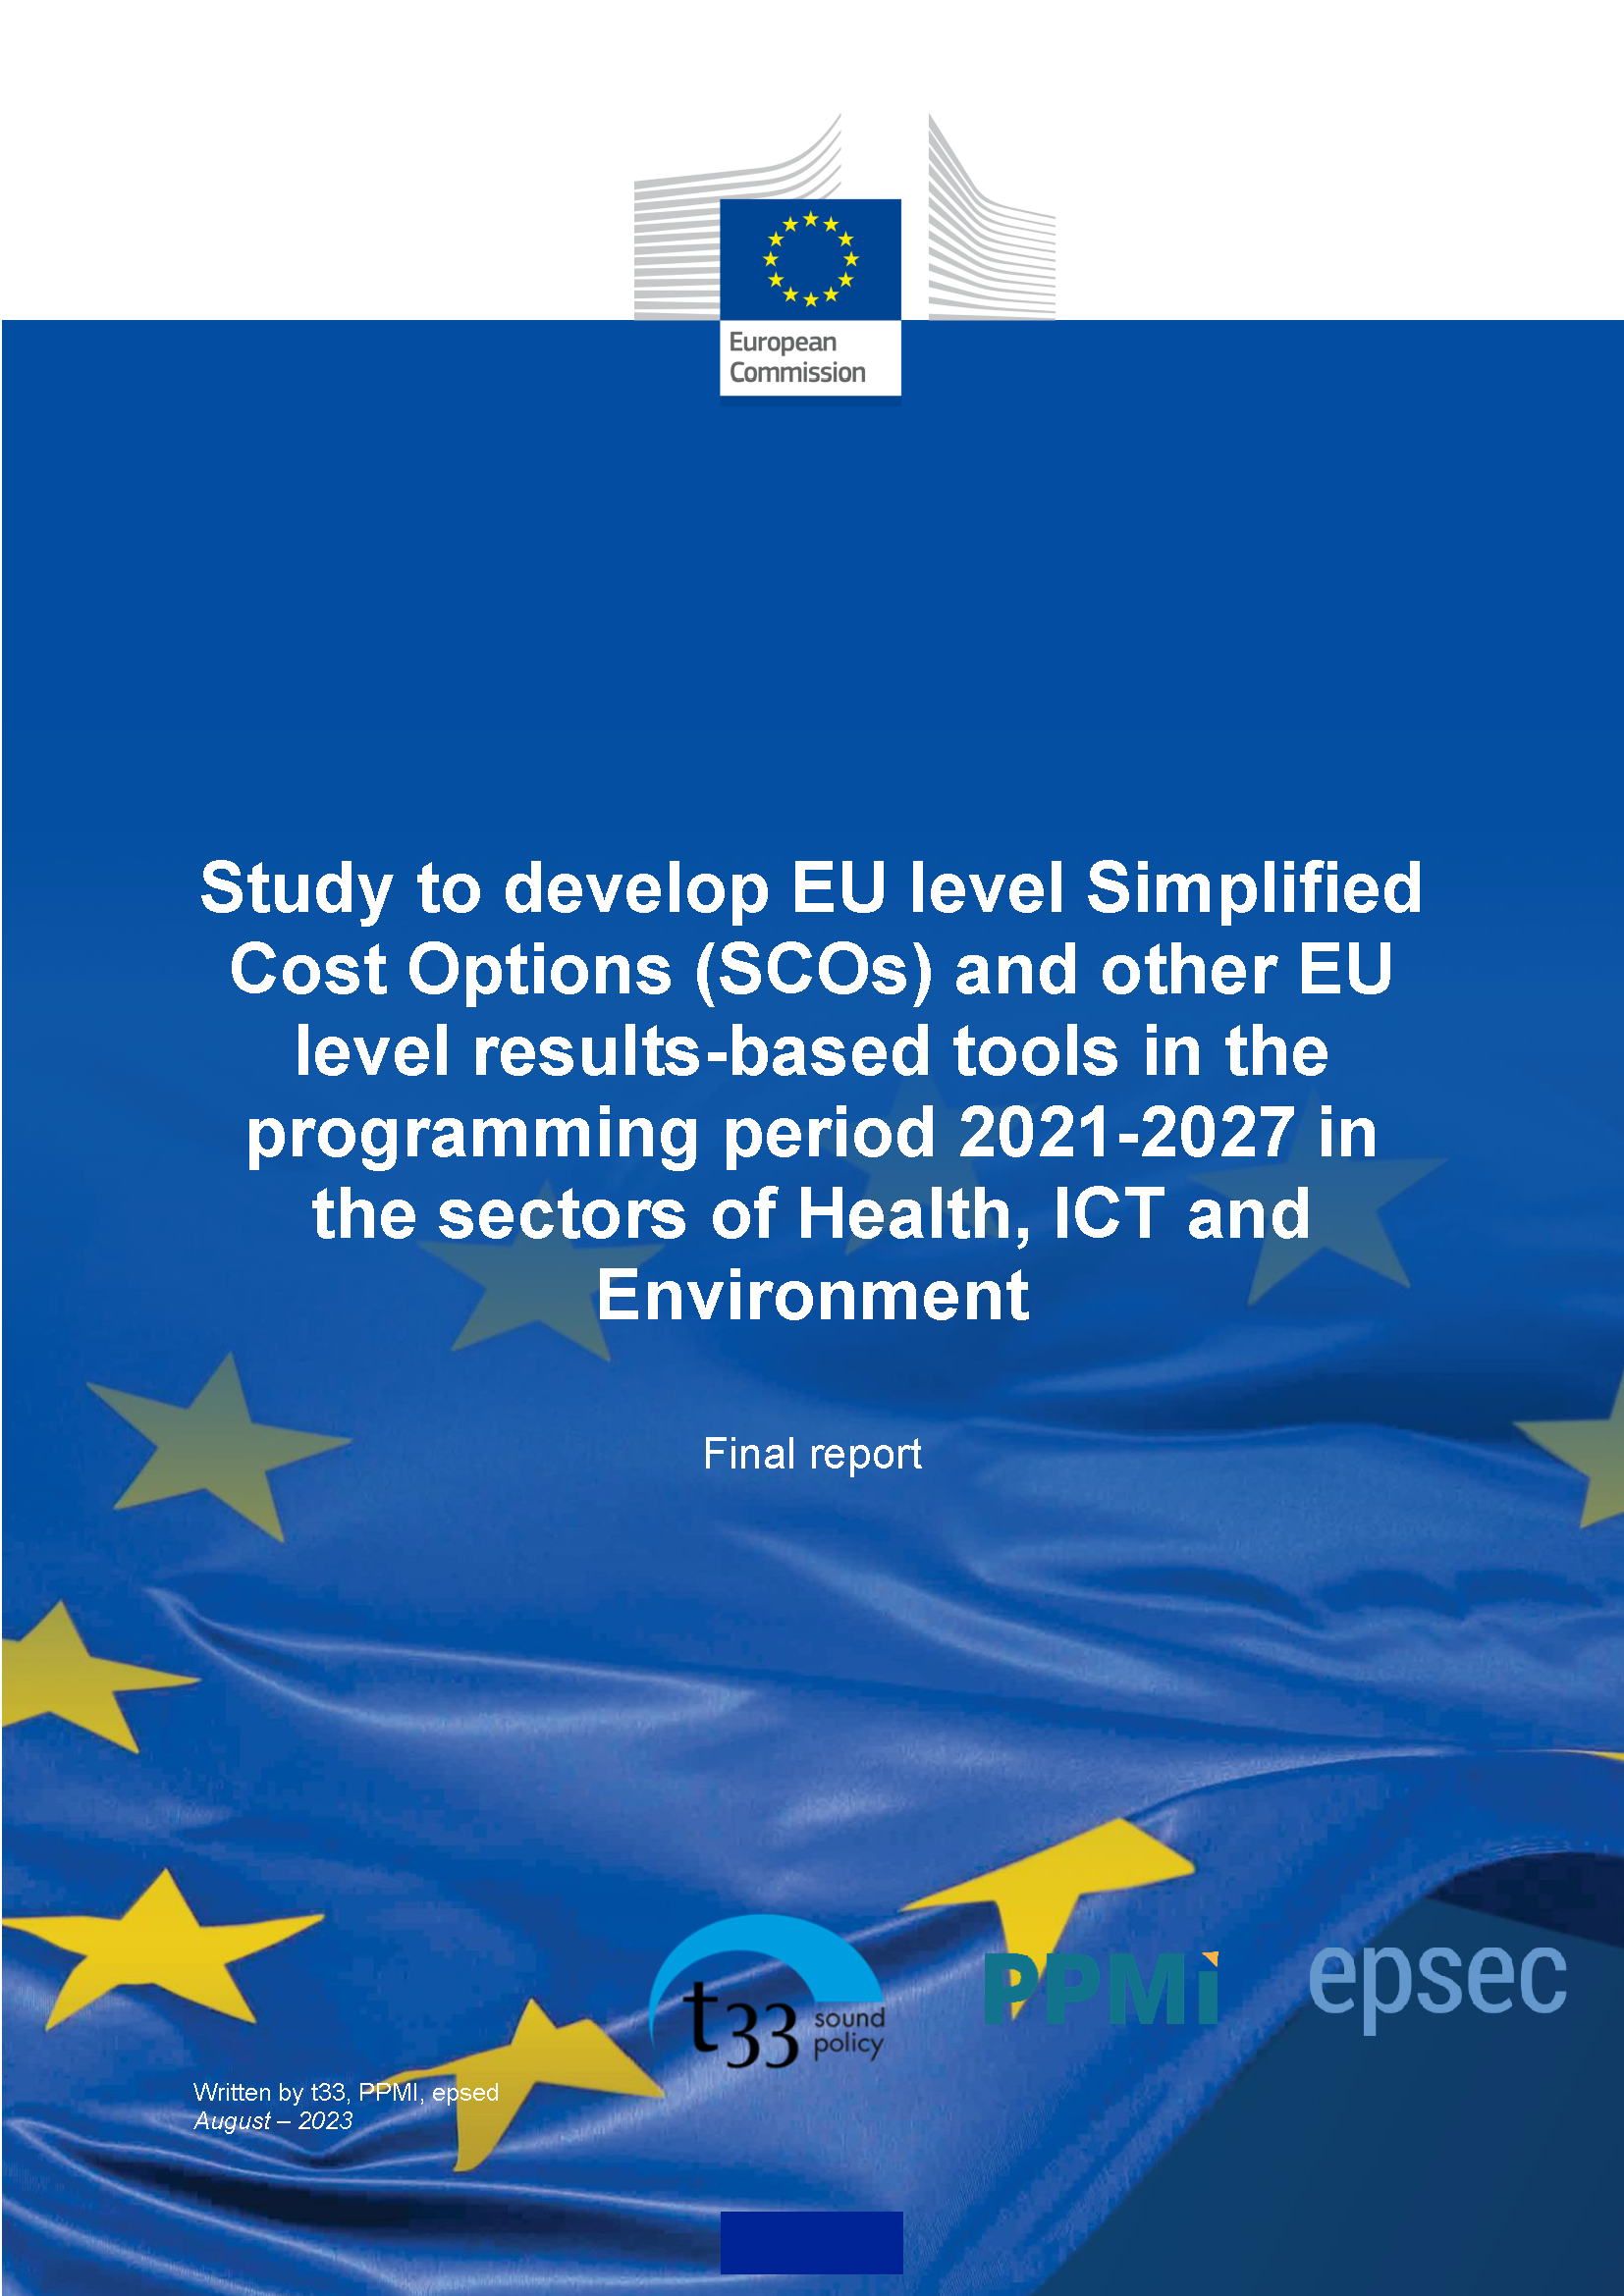 Study to develop EU level Simplified Cost Options (SCOs) and other EU level results-based tools in the programming period 2021-2027 in the sectors of Health, ICT and Environment